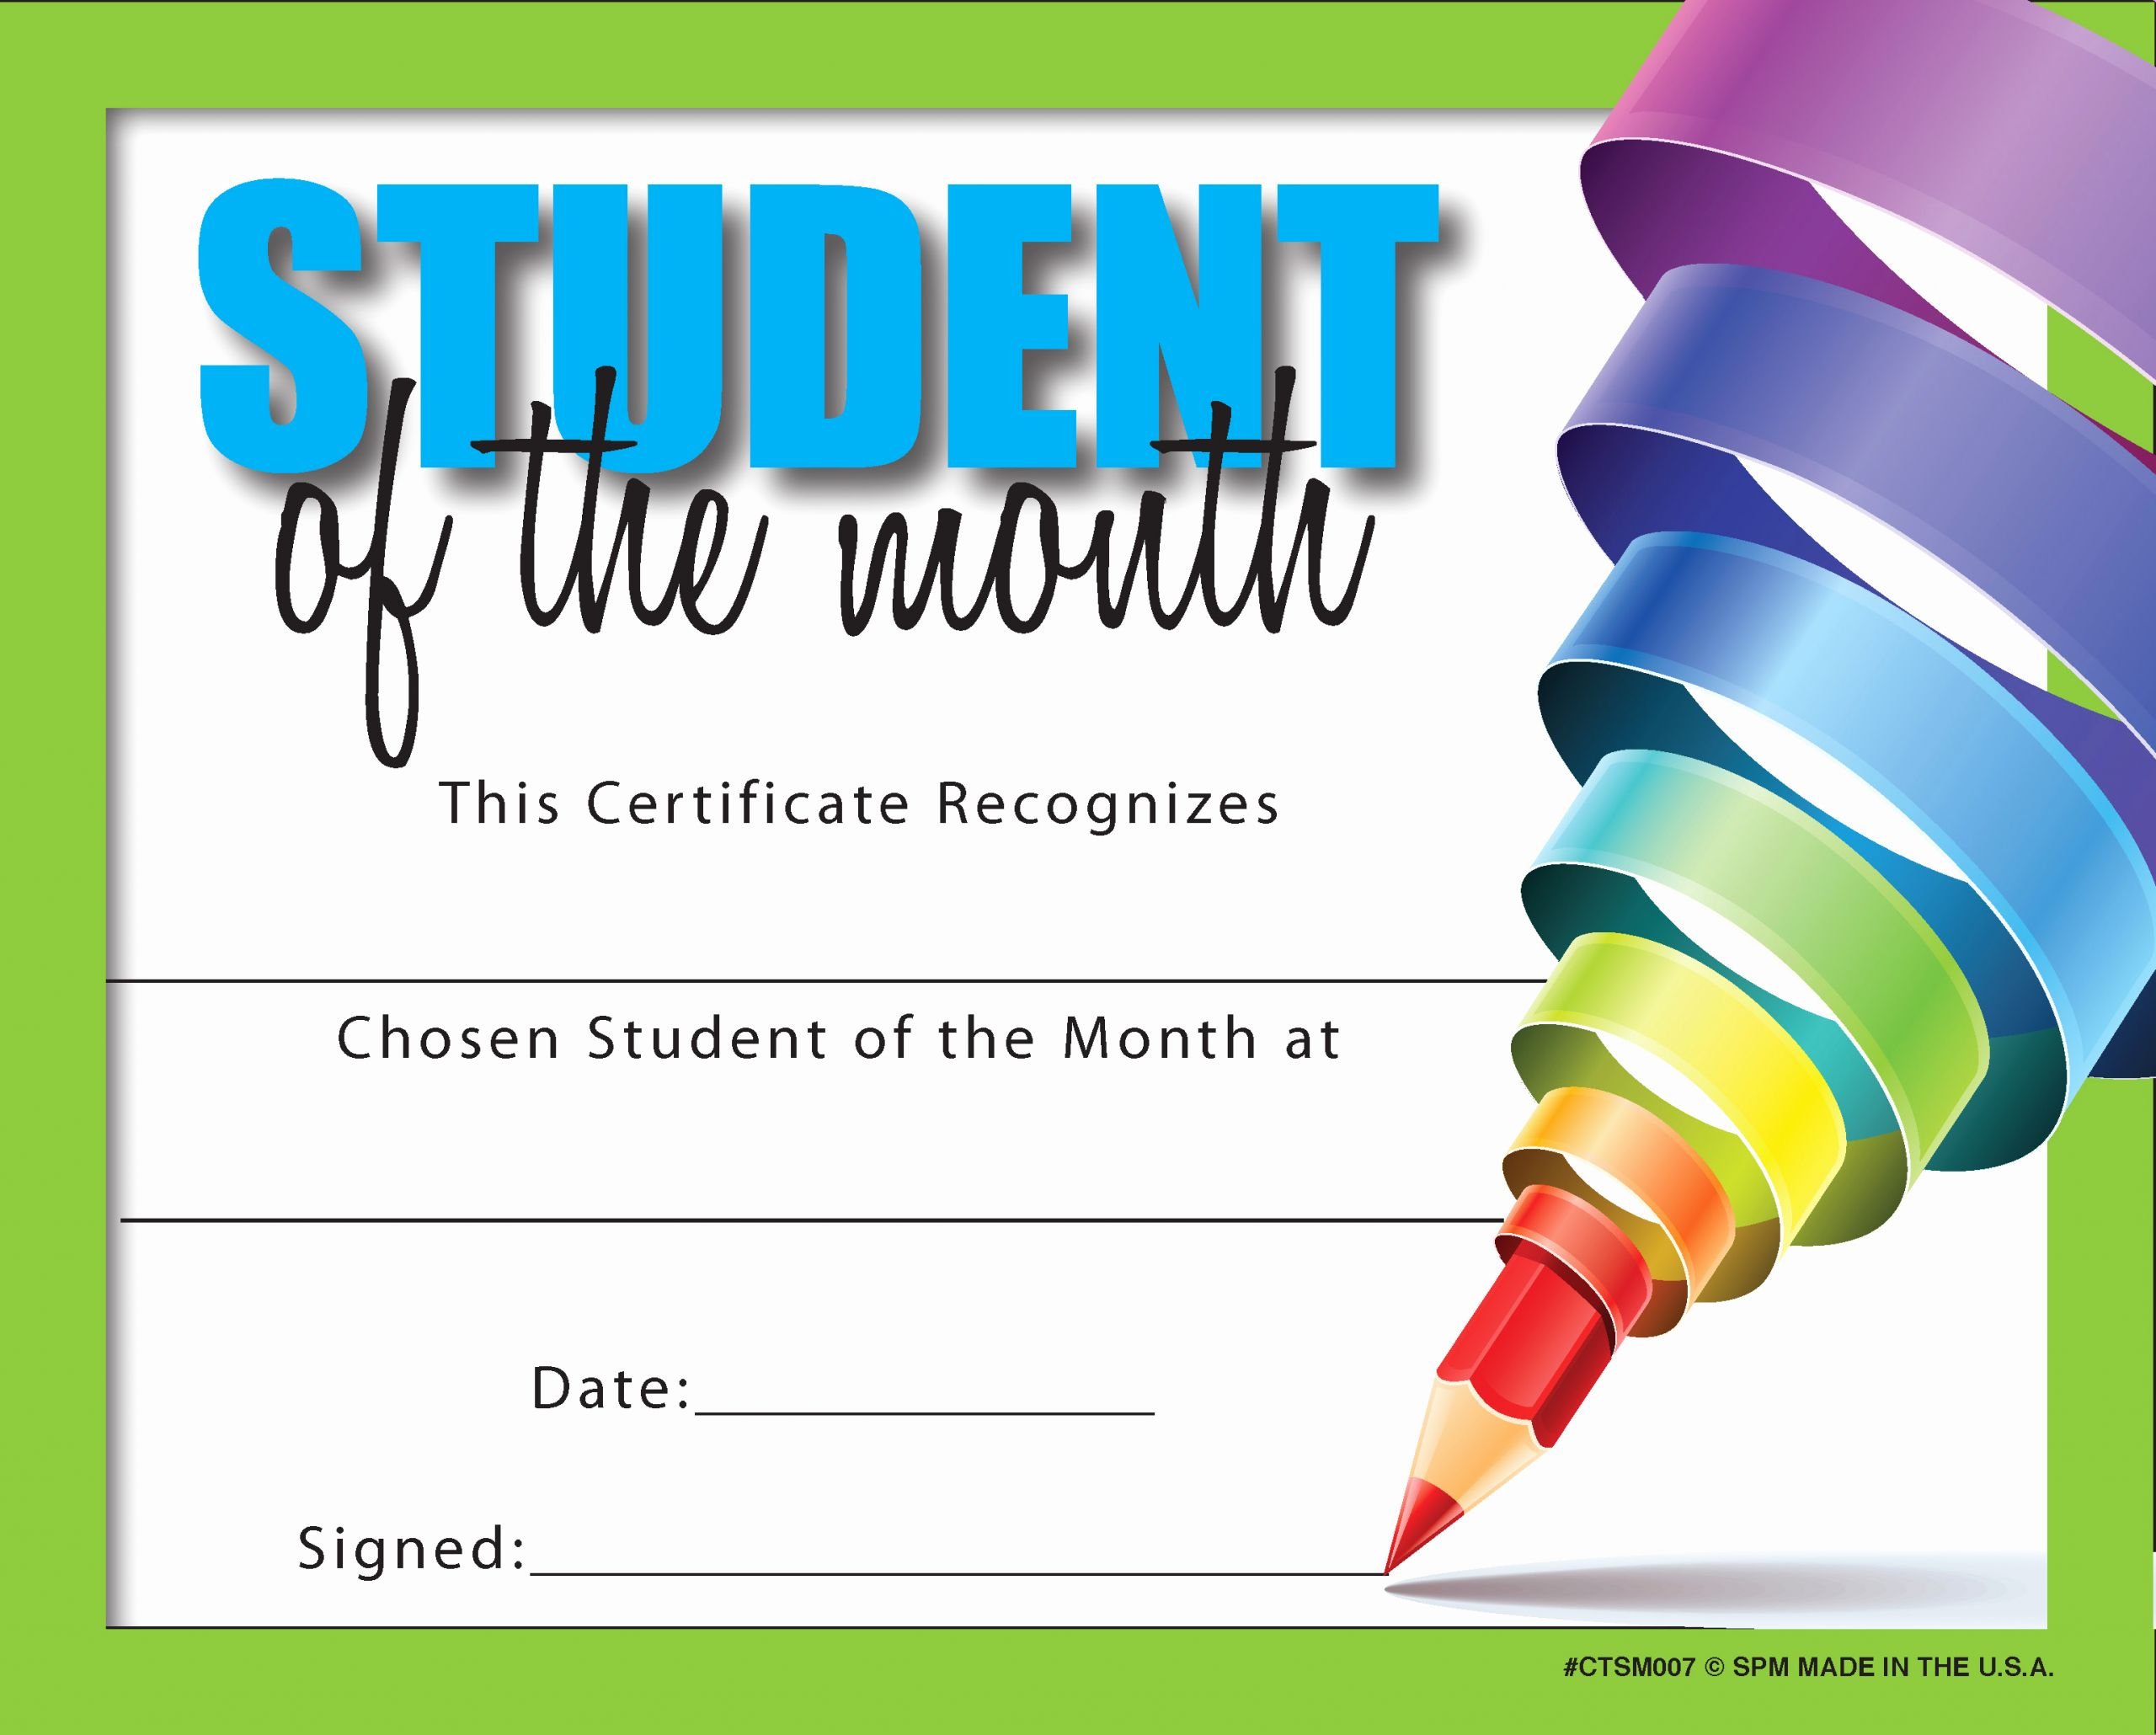 Student Of the Month Certificate New Certificate for Student Of the Month Ctsm007 School